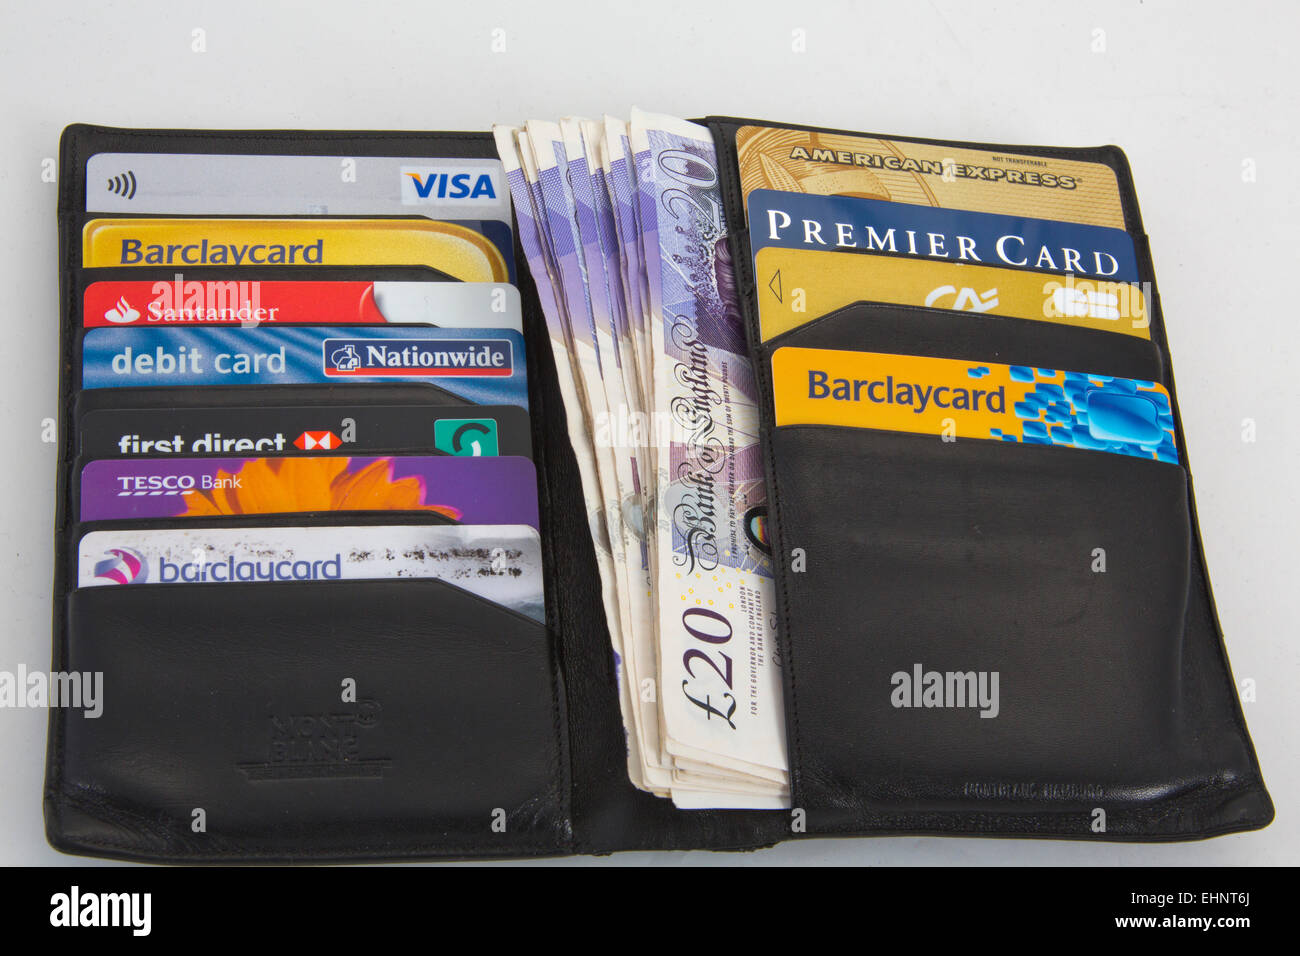 Black wallet with Assortment of credit cards Visa and American express 151142 Credit Cards Stock Photo